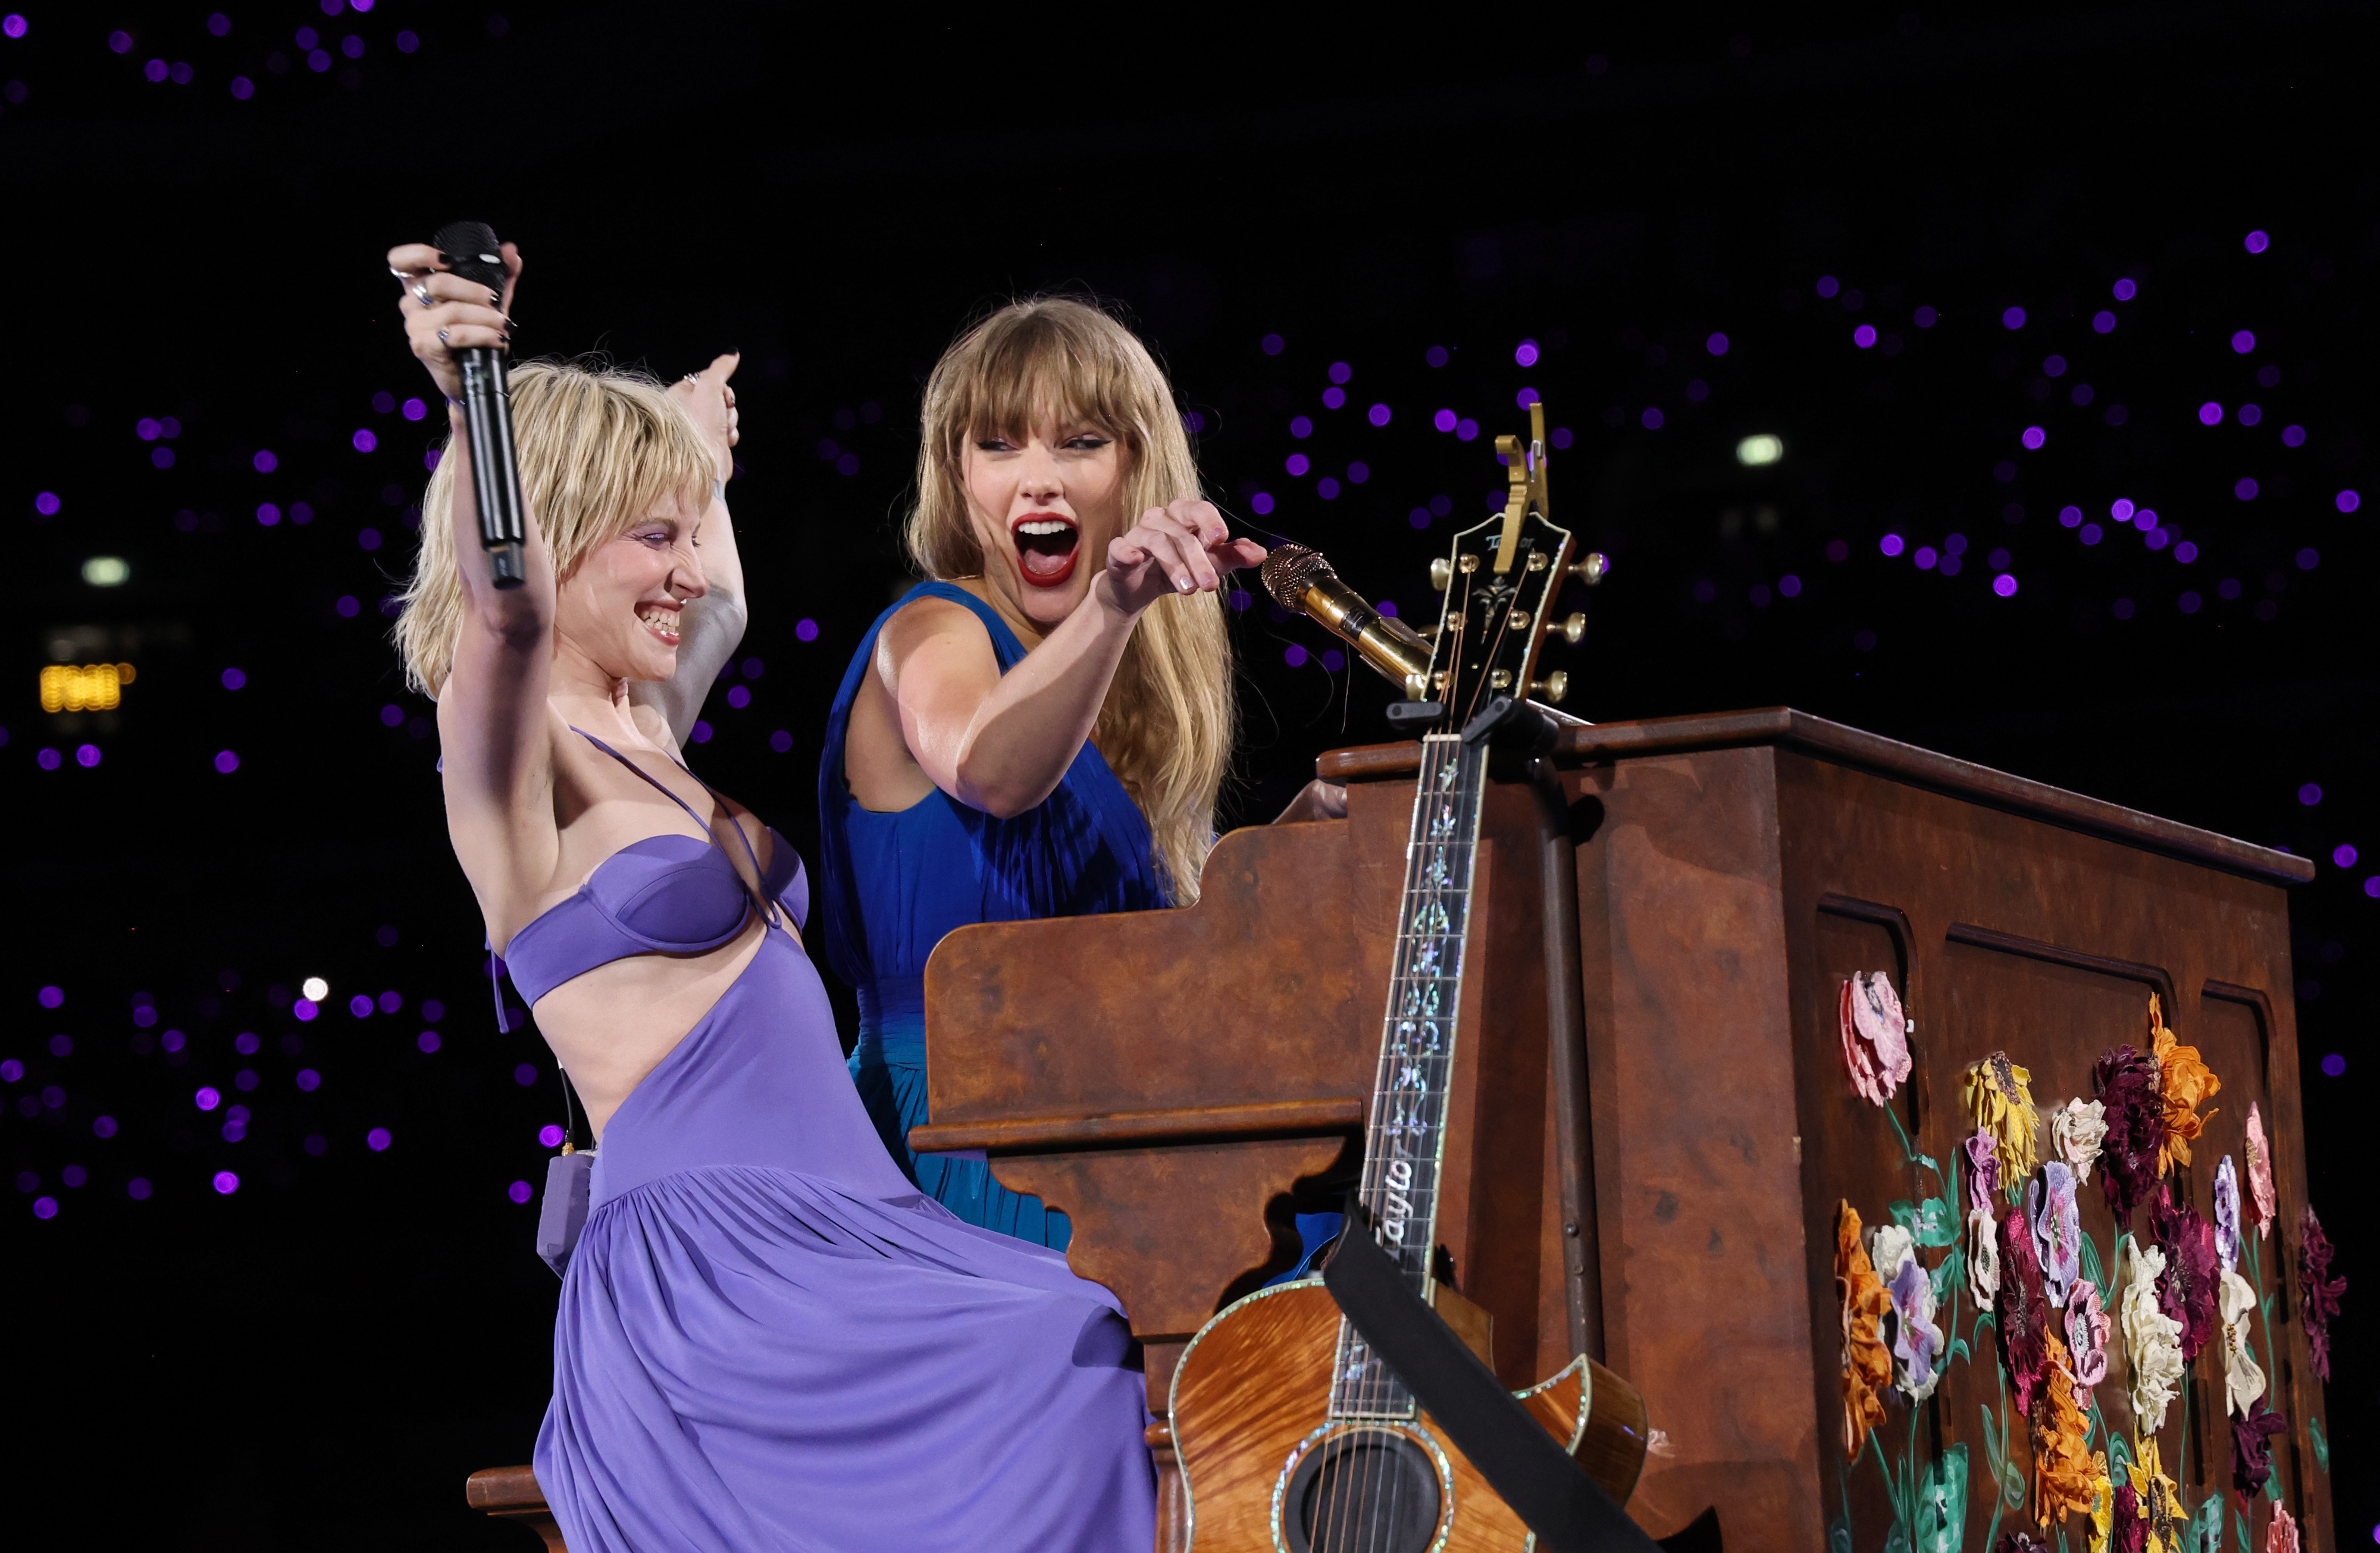 Taylor Swift and Hayley Williams on stage, Hayley wearing a purple dress while Taylor plays a flower-adorned piano and holds a guitar during a performance